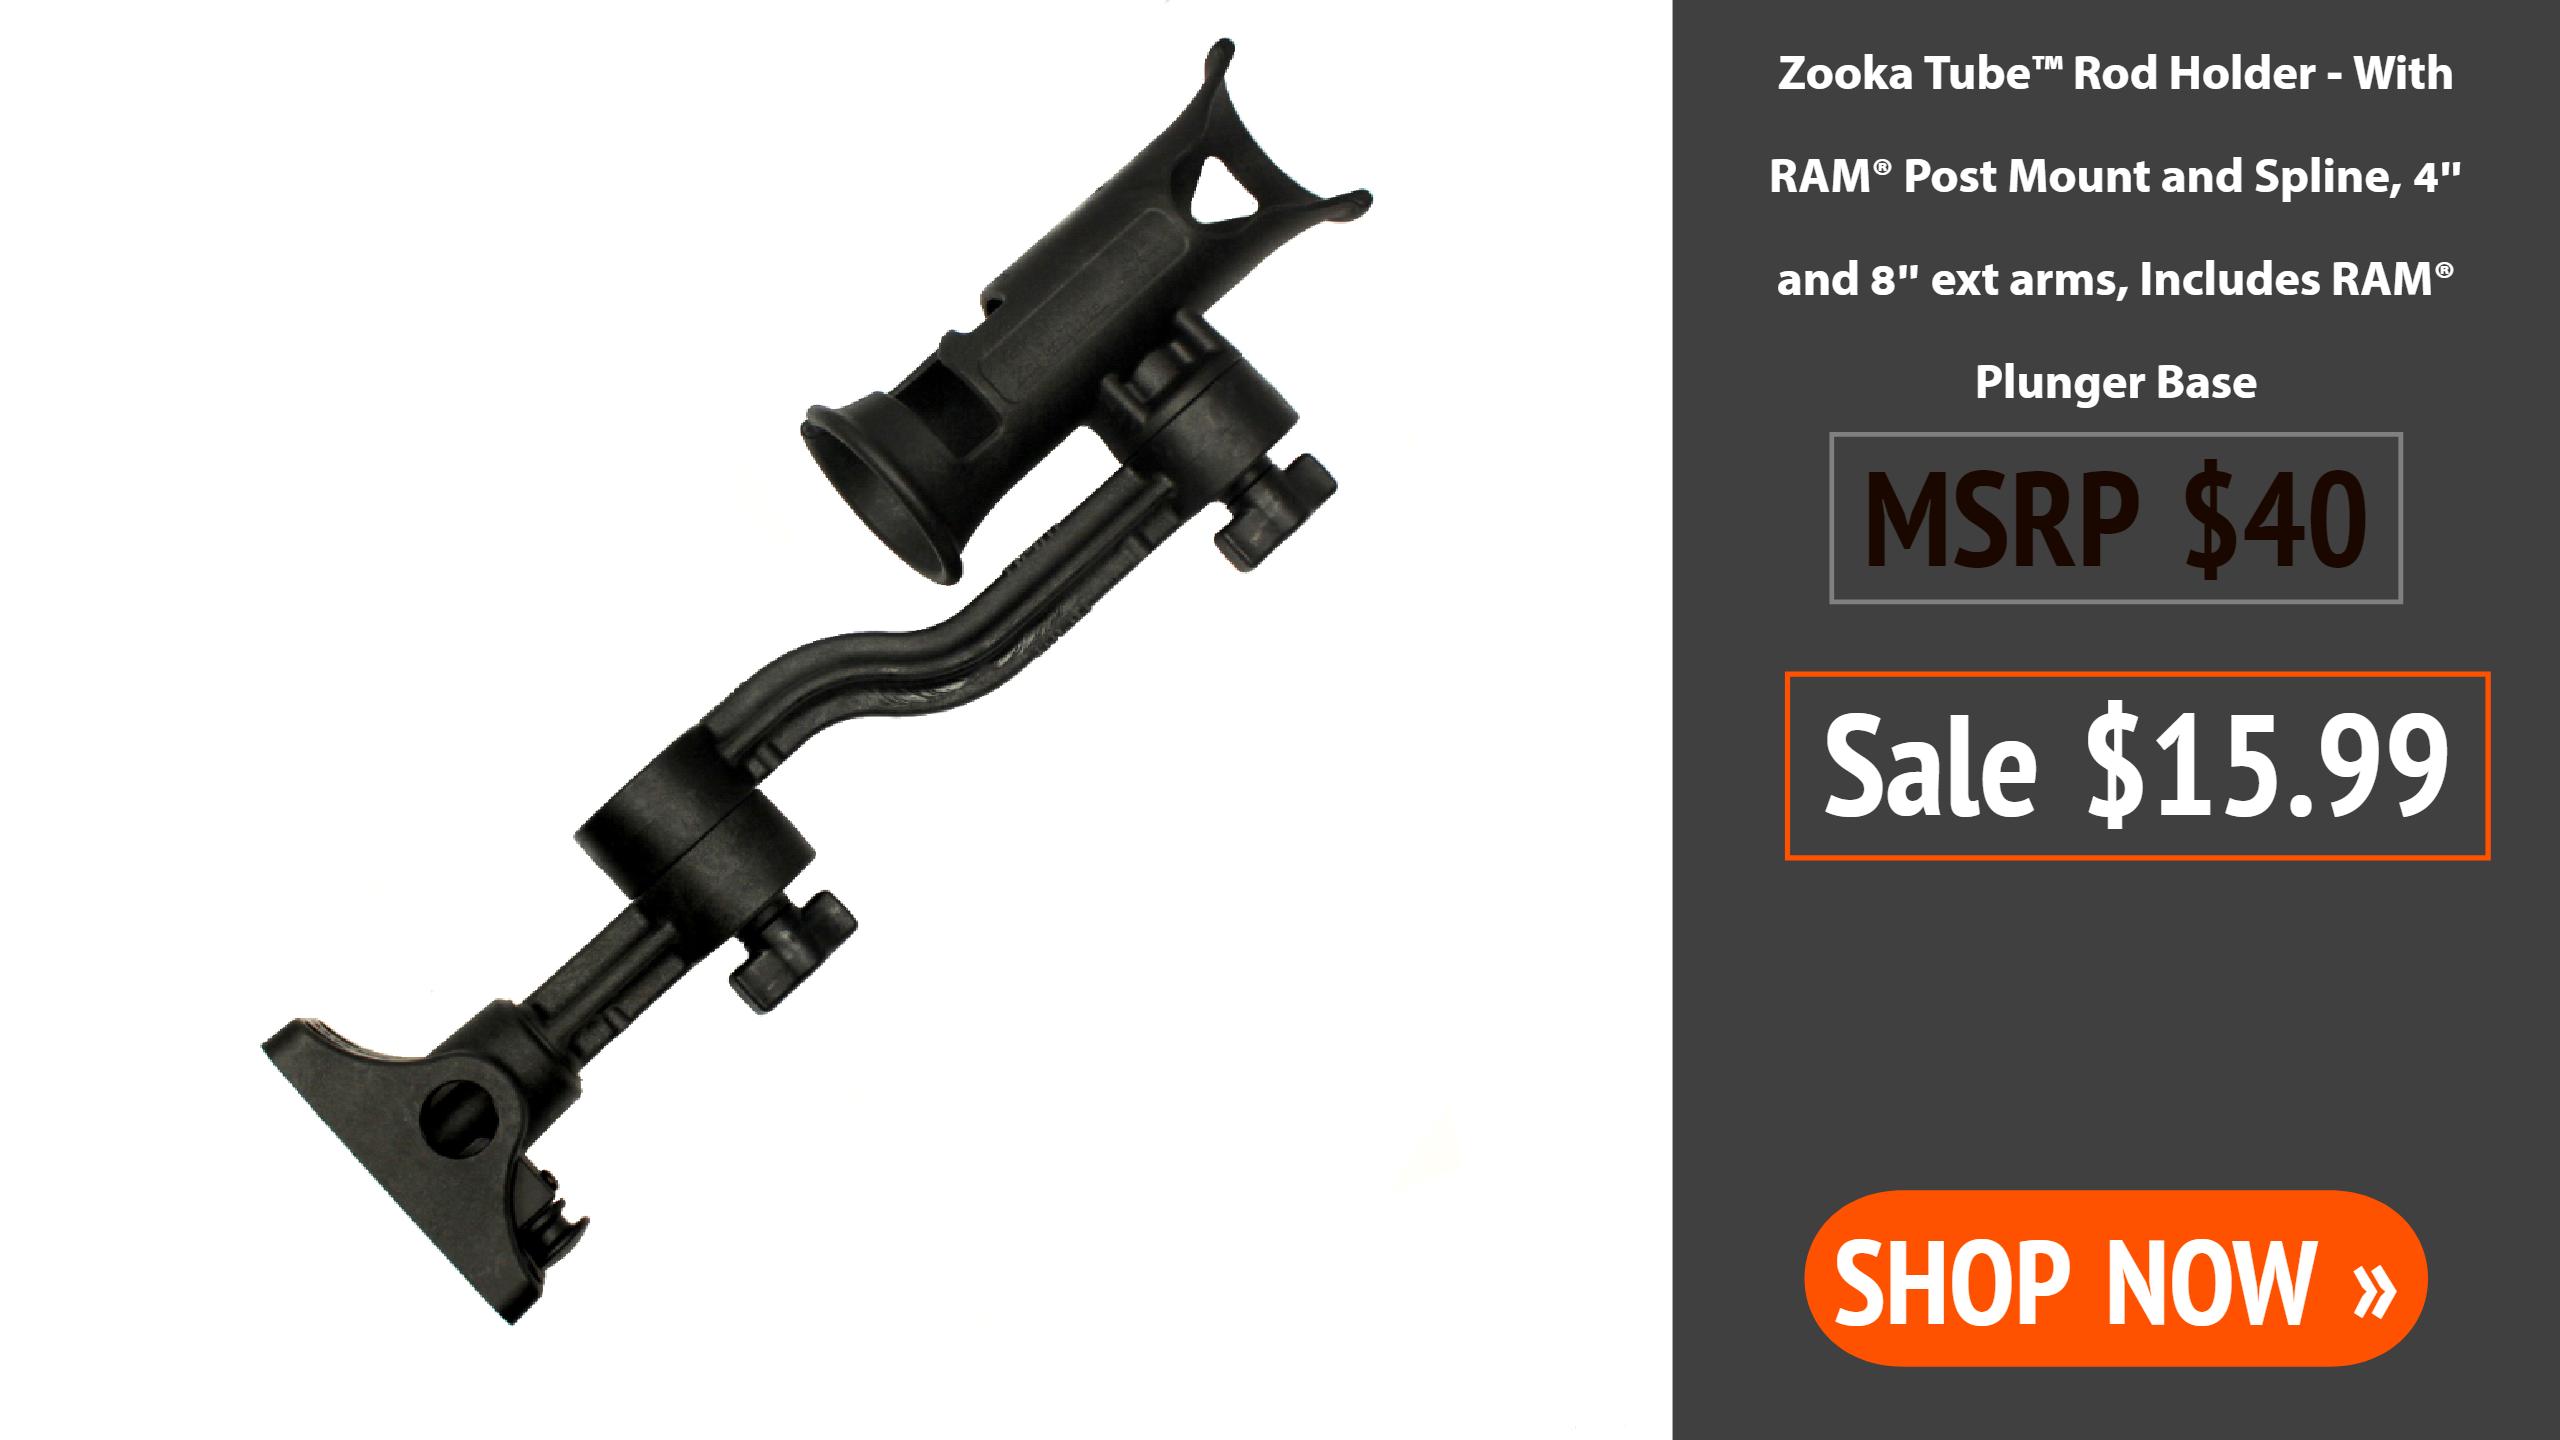 YakAttack Black Friday Blowout Sale Zooka Tube Kayak Fishing Rod Holder with Extension Arms and Plunger Base